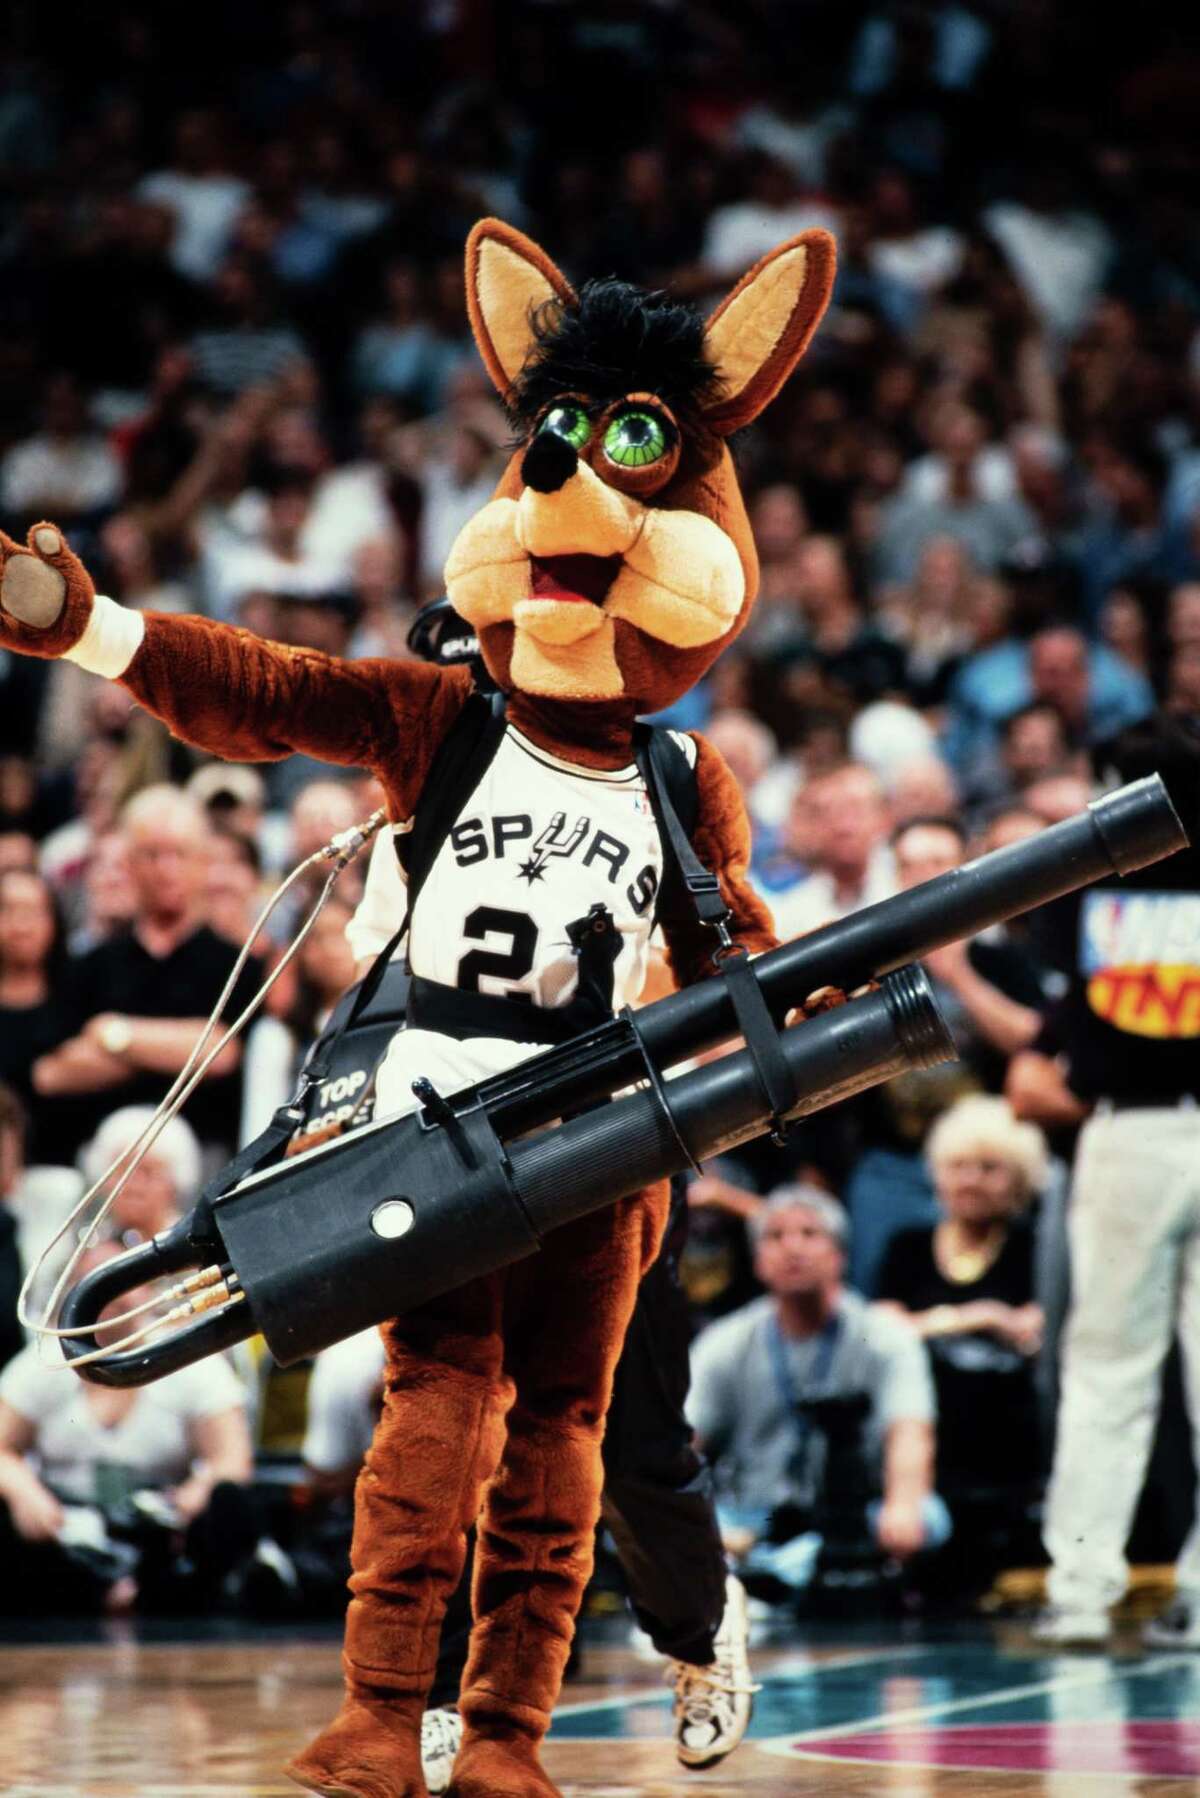 Tim Derk as the Spurs Coyote, shoots a T-shirt into the stands during a game with an early iteration of the T-shirt cannon. Derk appeared at more than 1,110 Spurs games from 1983 to 2004 and was instrumental in the development of the T-shirt cannon, the propulsive device that is now ubiquitous at most sporting events.